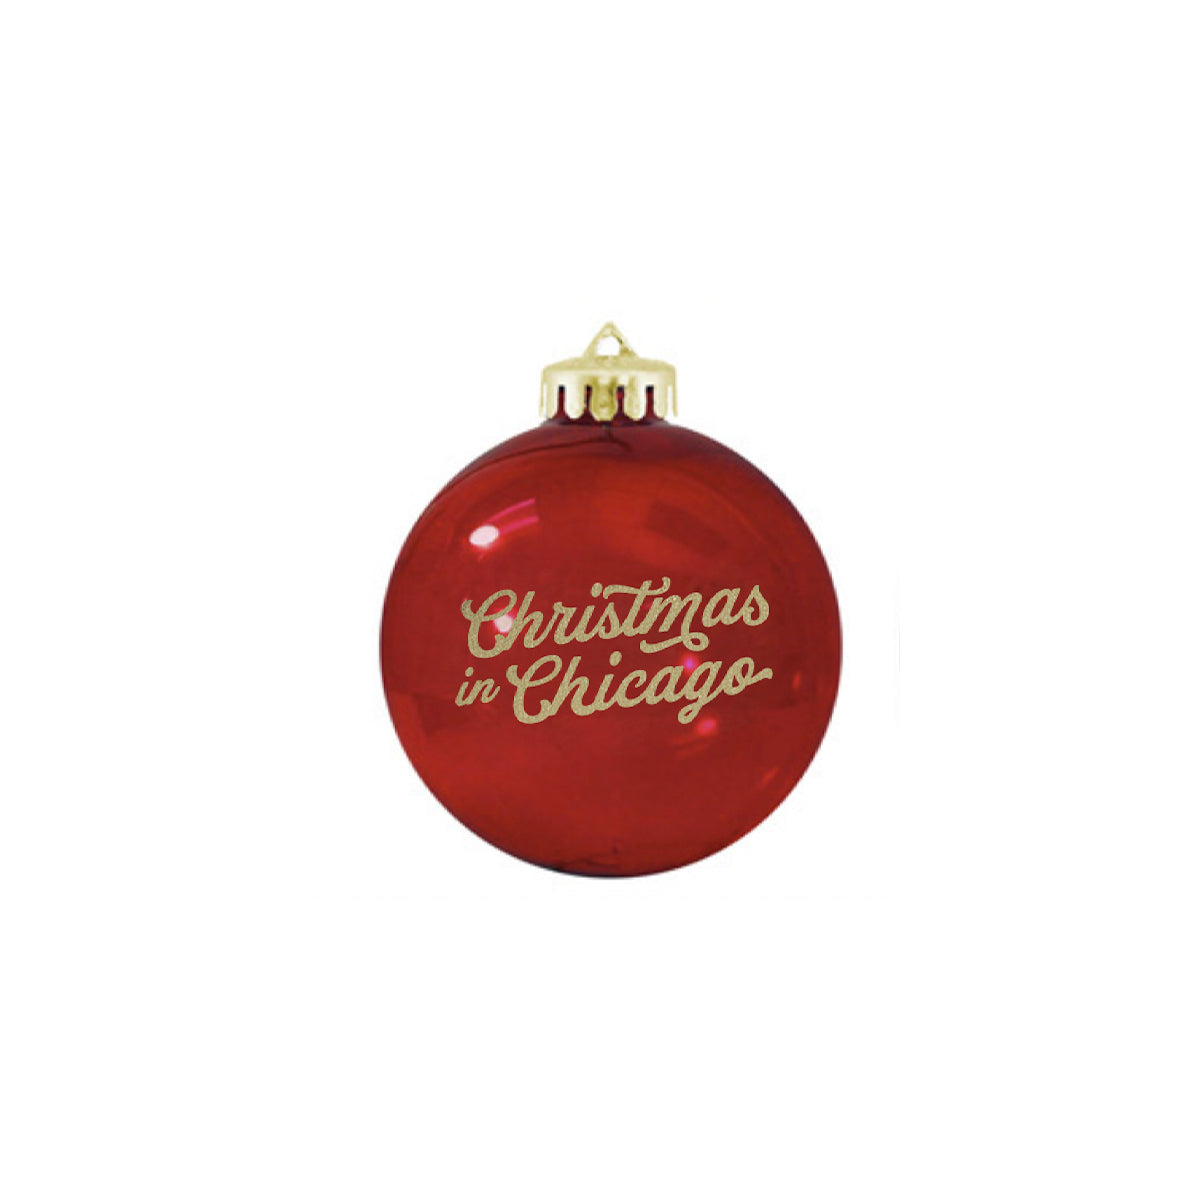 "Christmas in Chicago" Ball Ornament